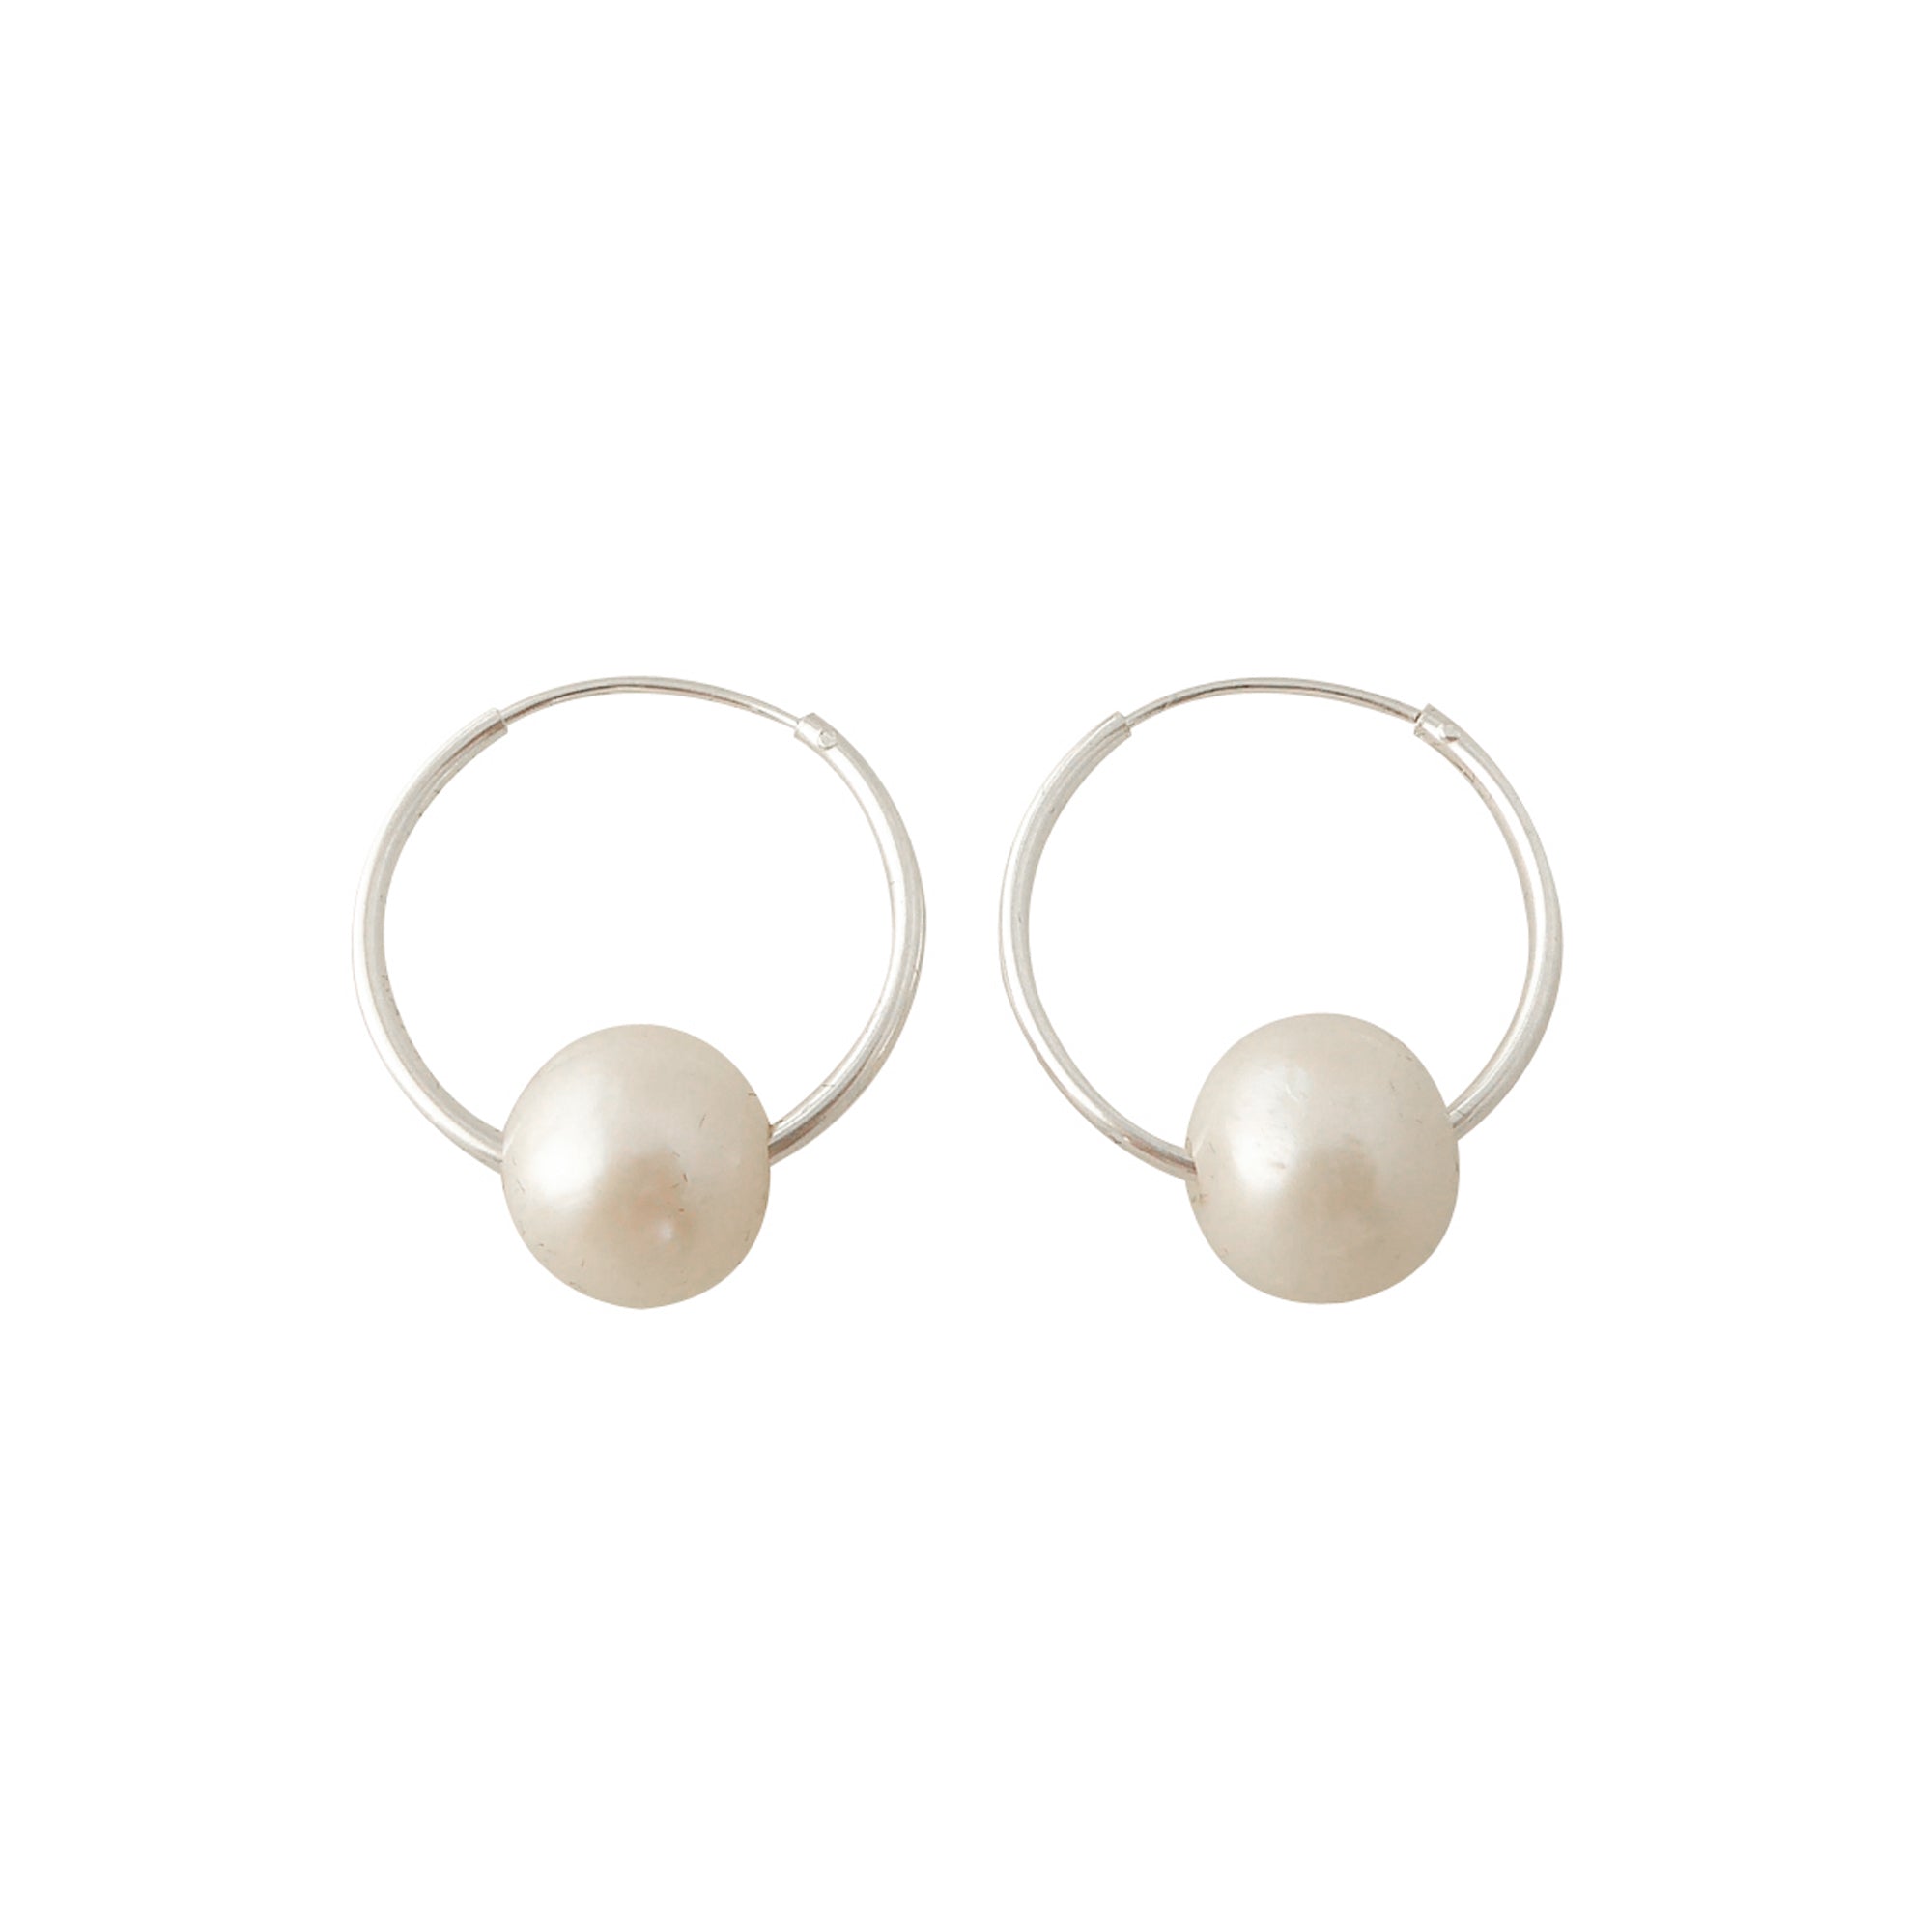 Small sterling silver hoop and pearl earrings by Jenny Dayco 1